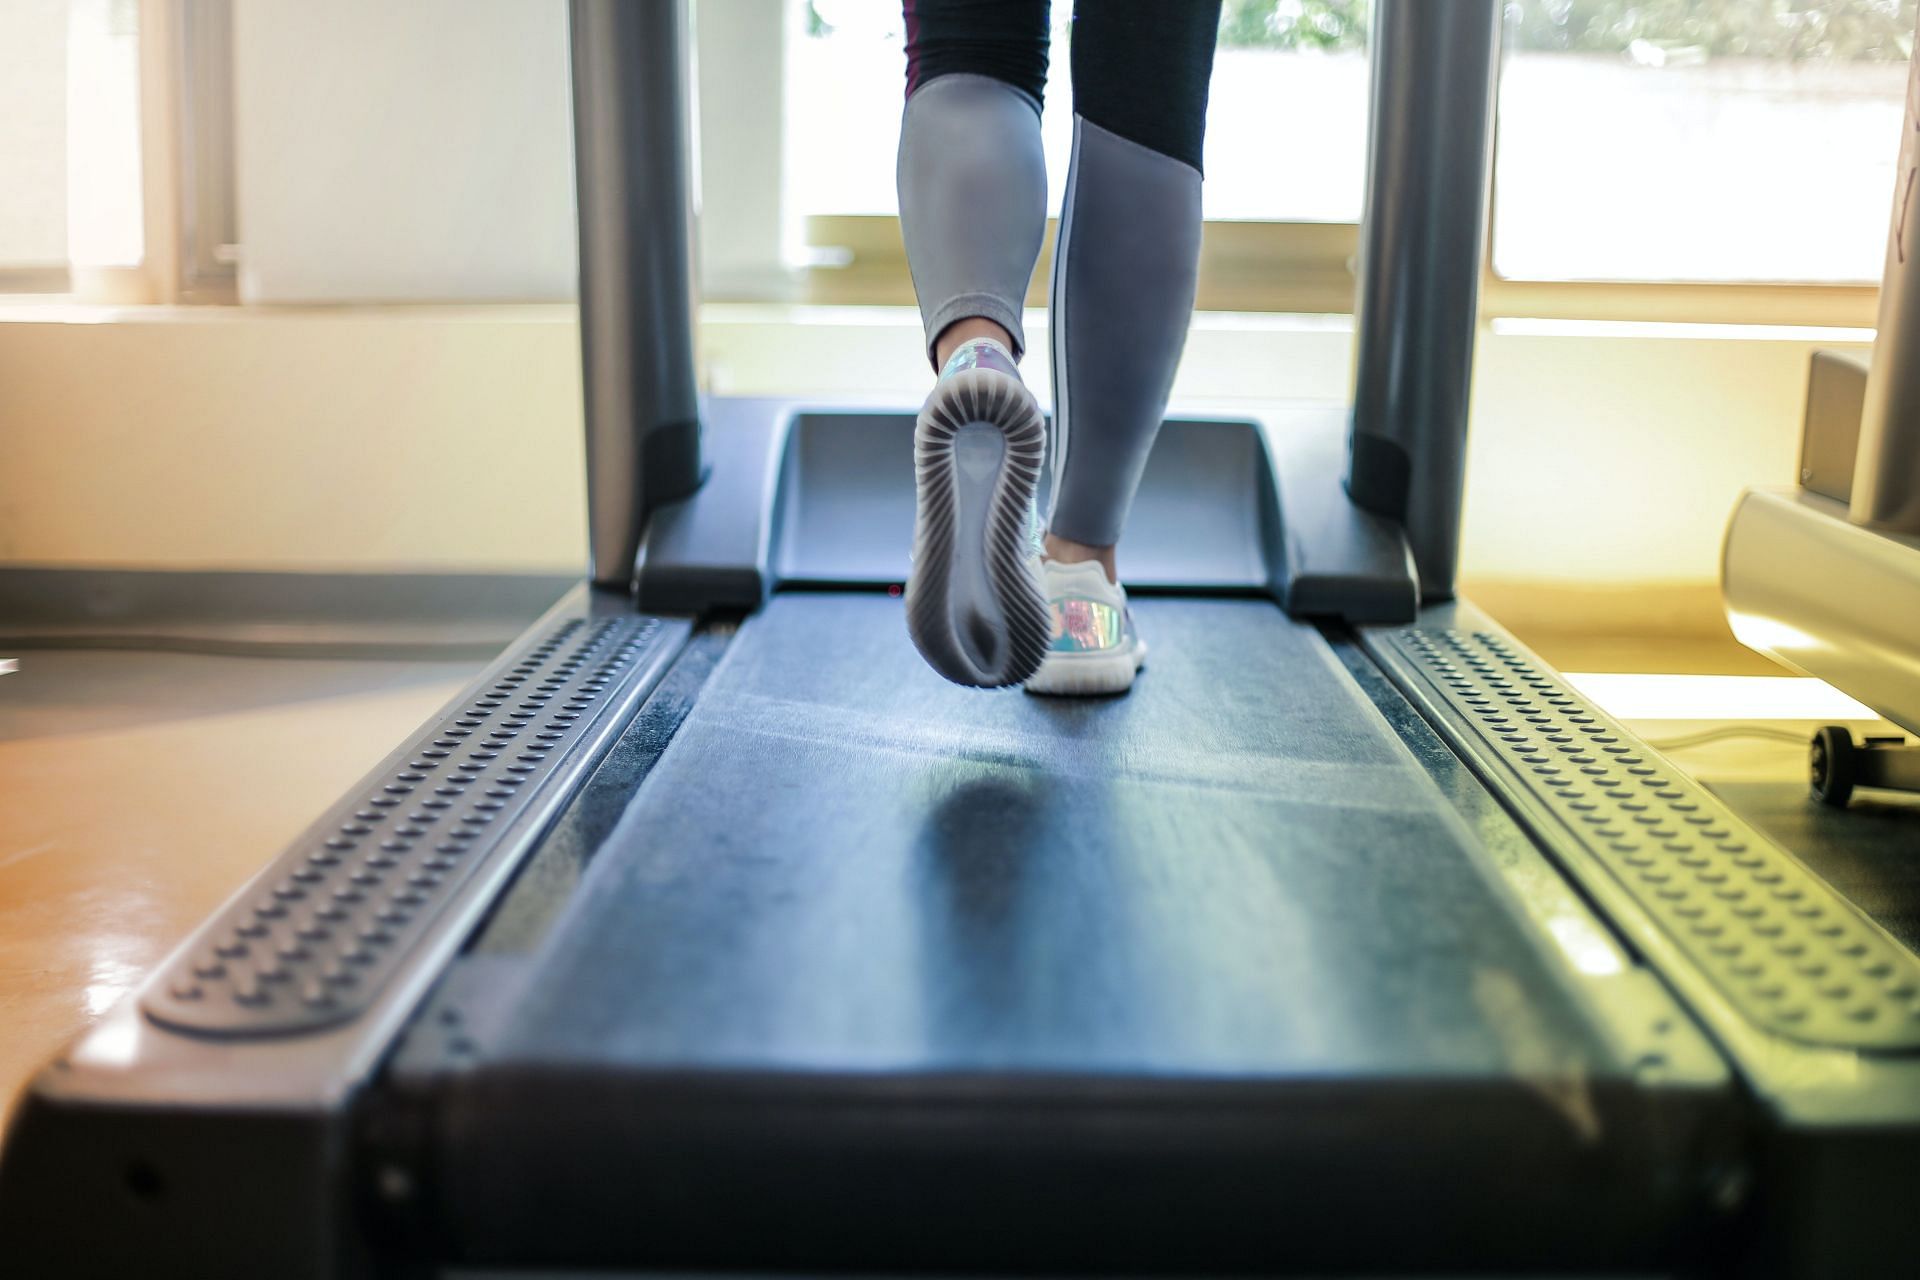 Strength training with cardio. (Image by Andrea Piacquadio / Pexels)